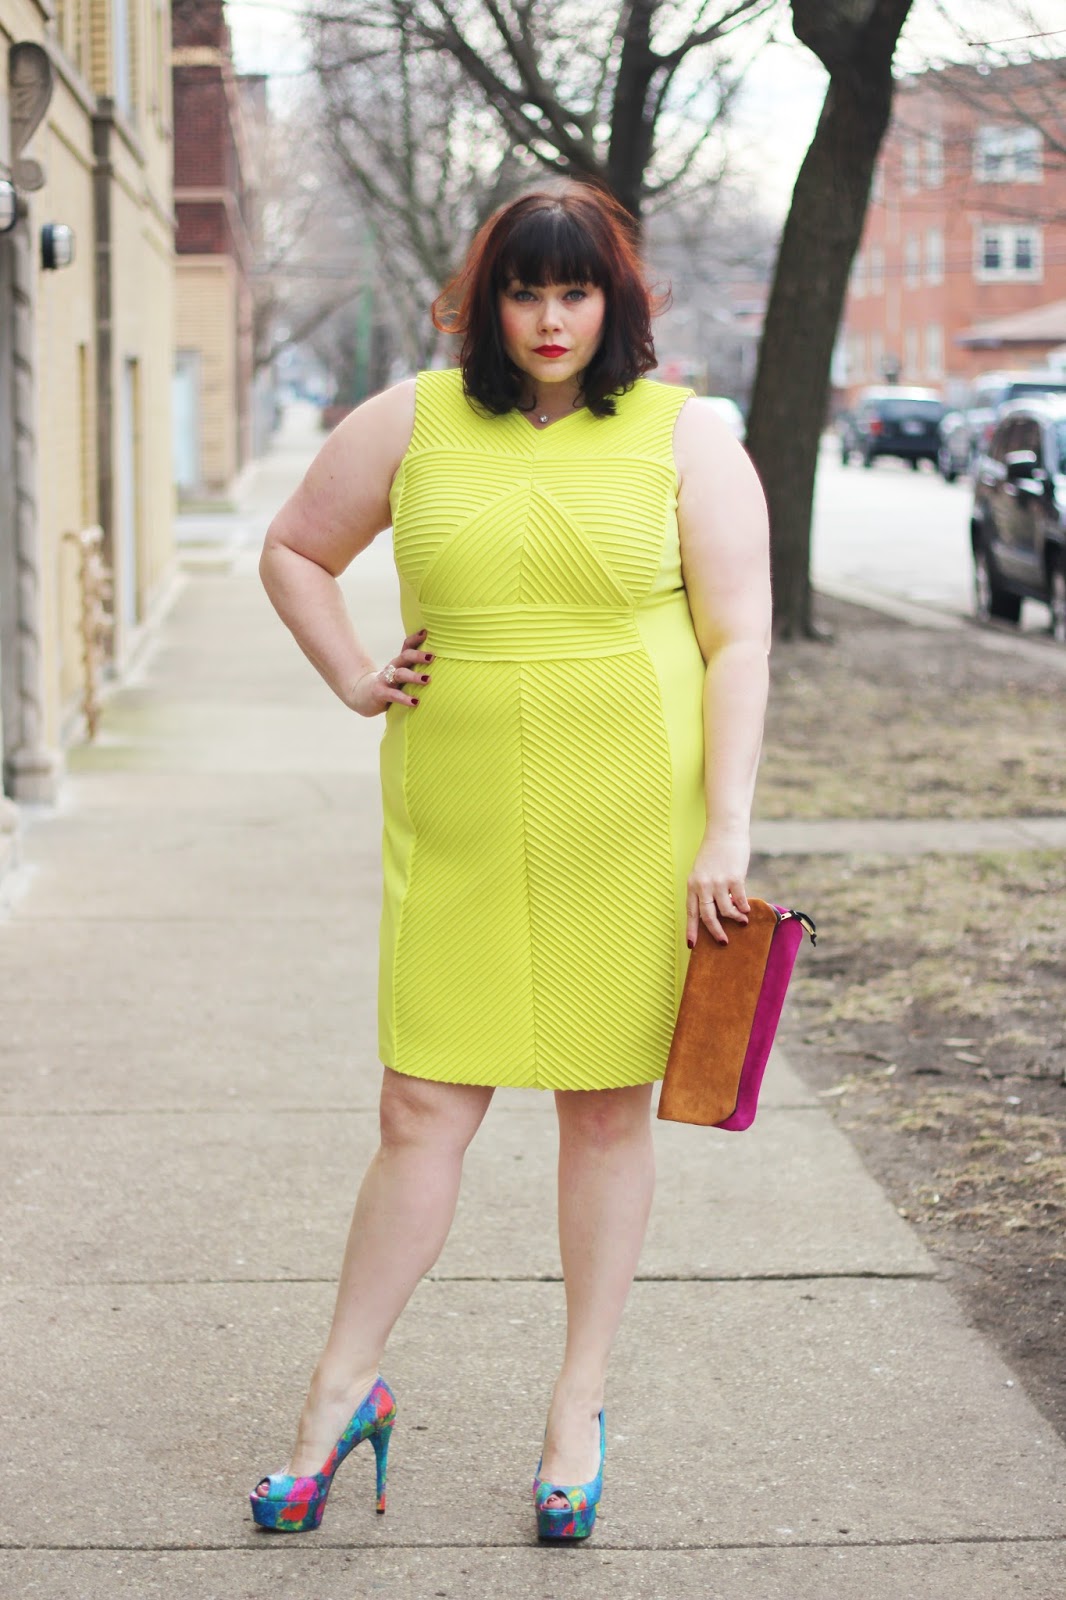 #Girlboss OOTD: Standing out in Neon Yellow